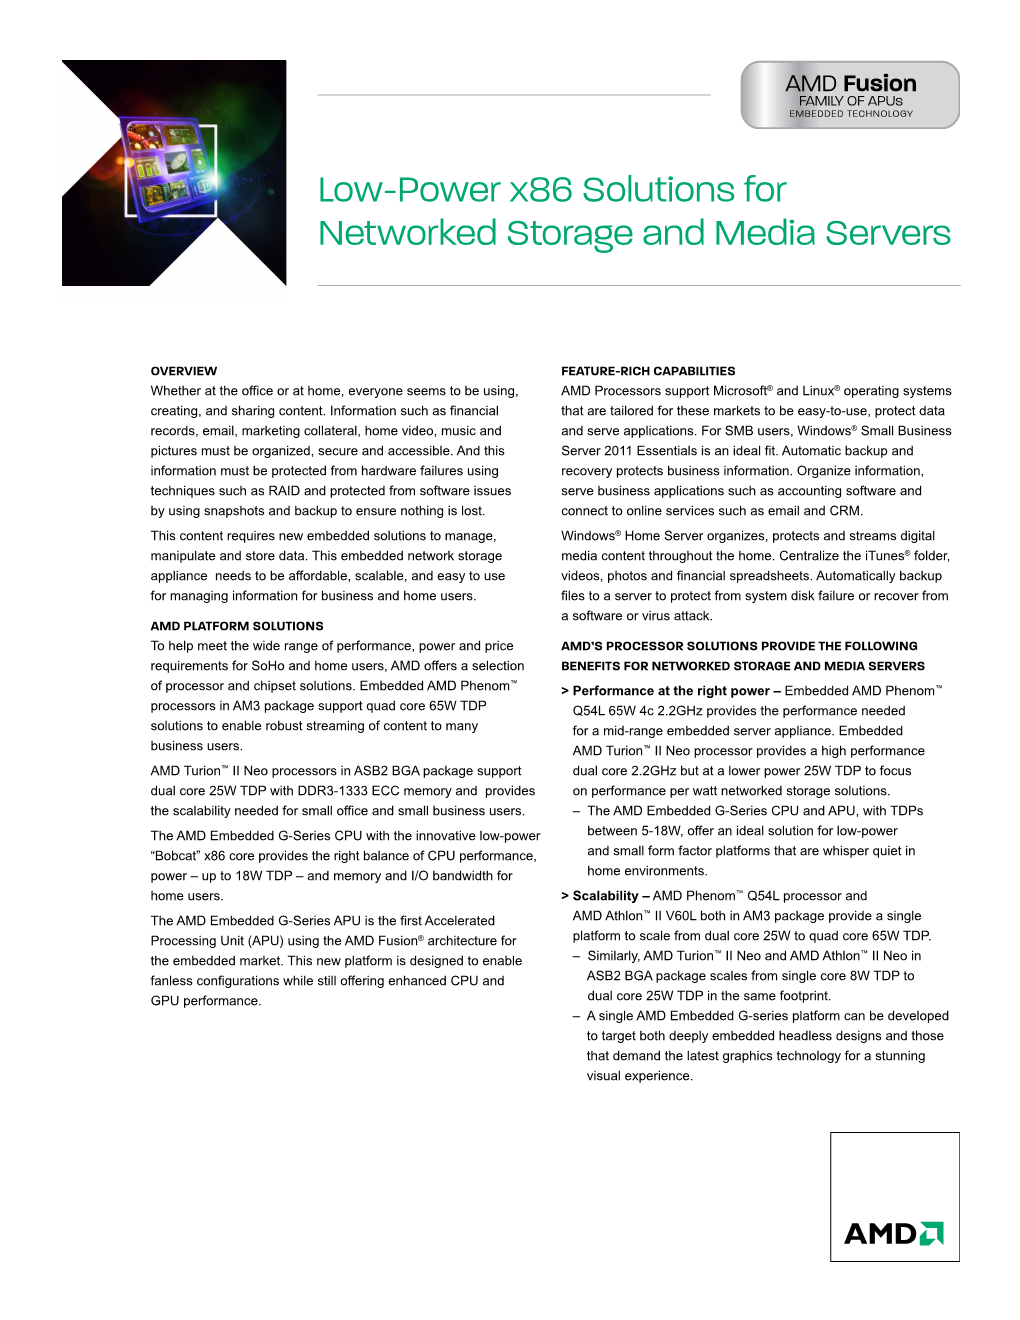 Low-Power X86 Solutions for Networked Storage and Media Servers